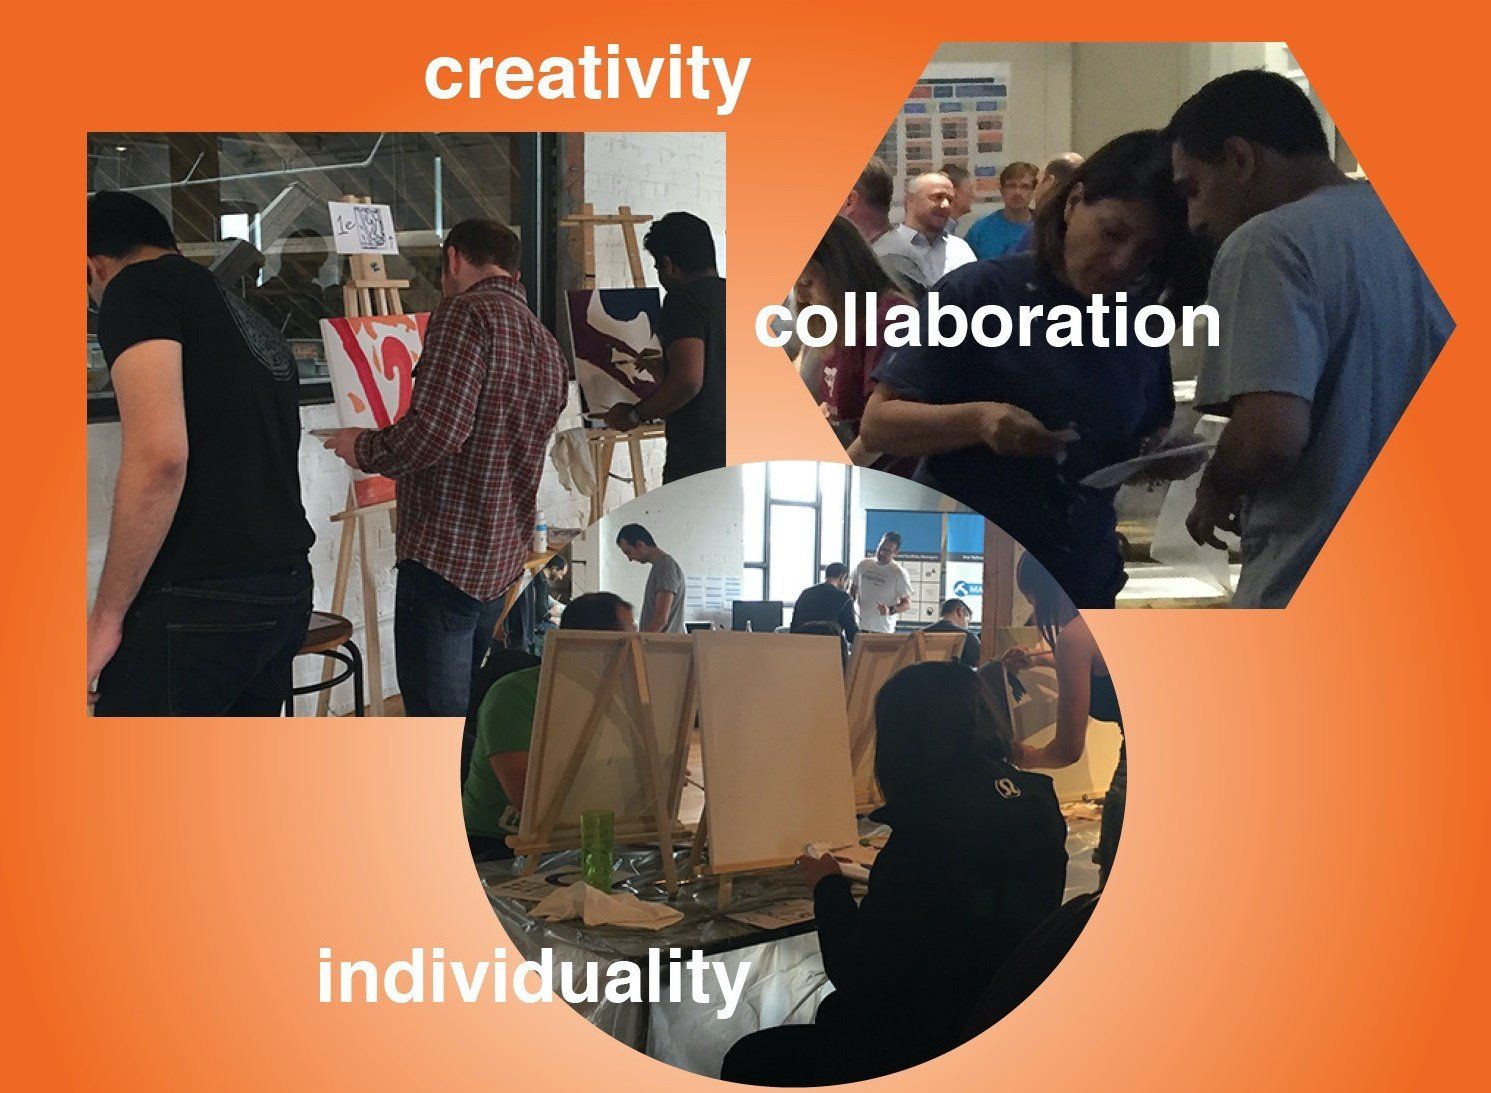 team building, team culture, collaboration, creativity, reconnecting, teamwork, individuality, HR strategy, business planning